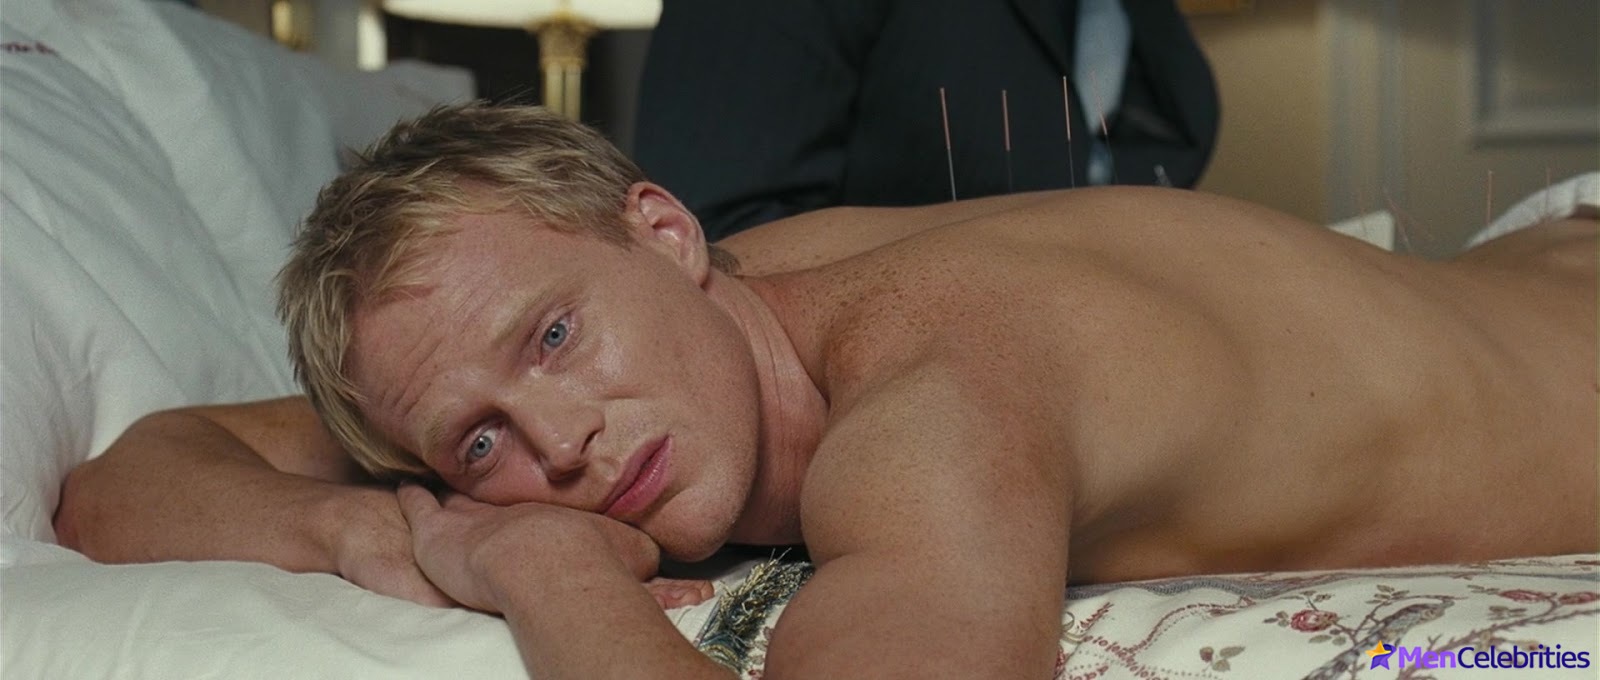 Paul Bettany nude and gay sex scenes.